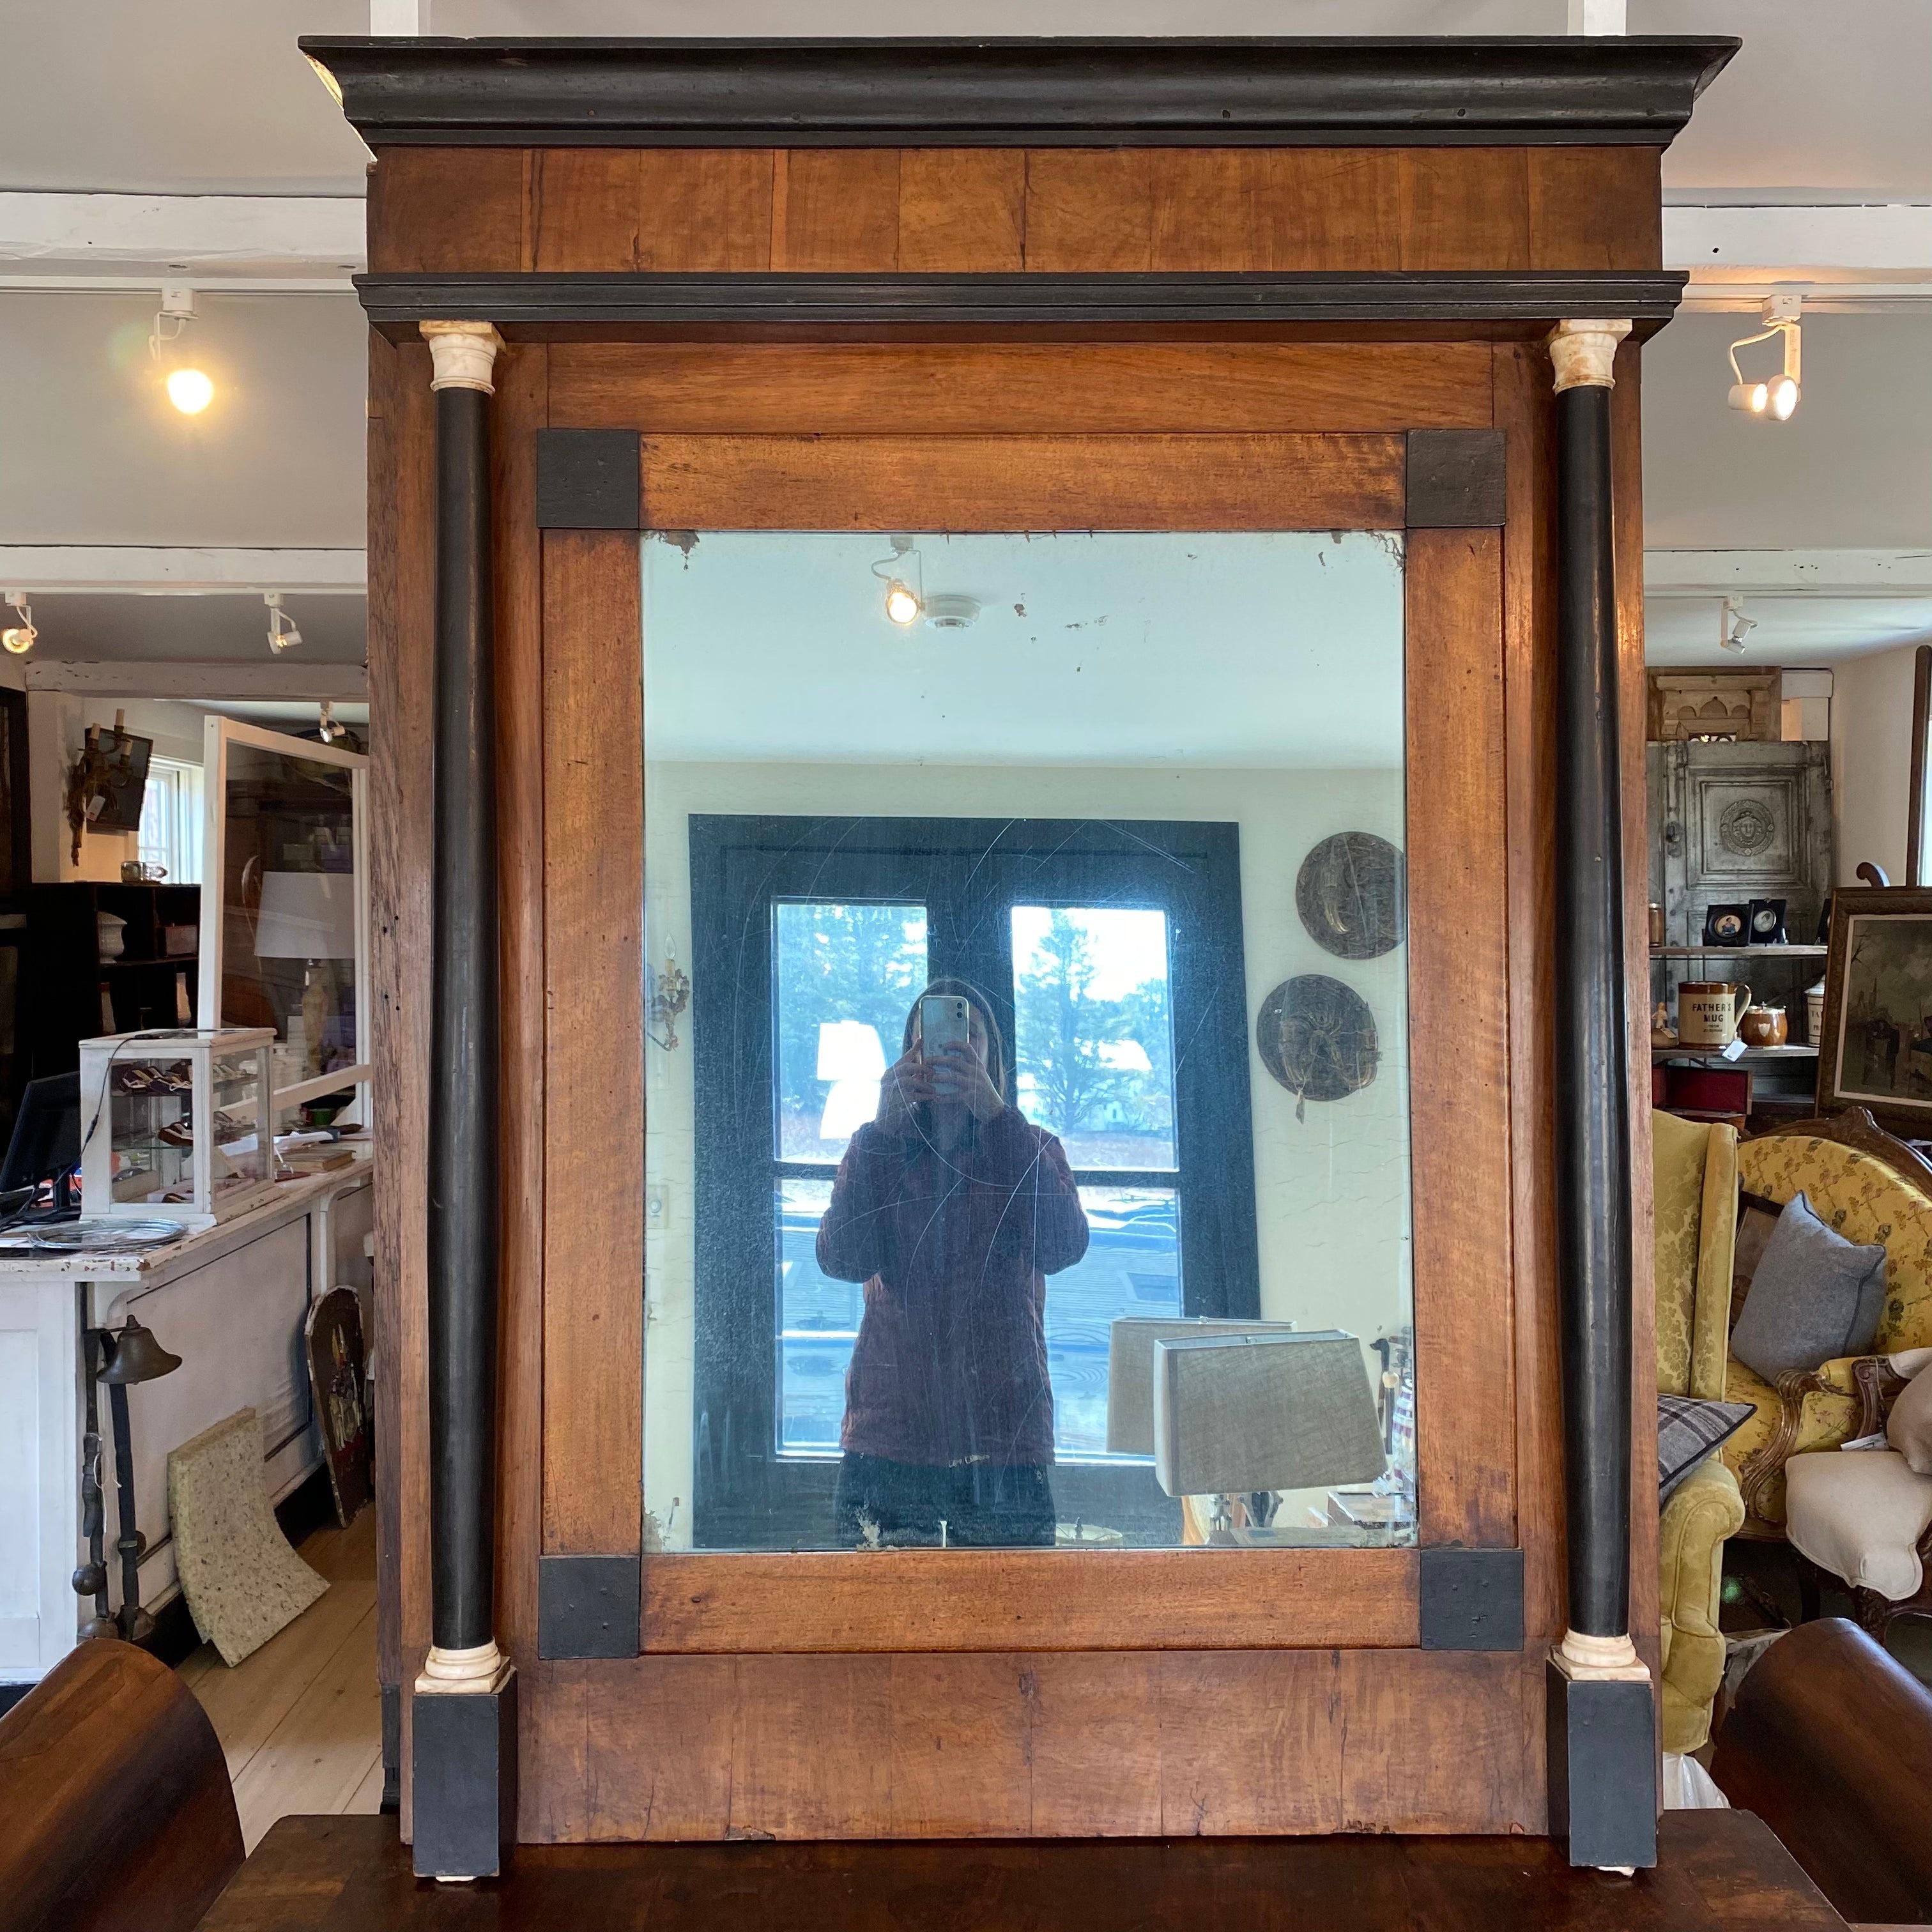 Stunning two piece French Directoire mirror over matching console, perfect for an entryway or important hallway. Mirror has original stunning mirror glass in framed walnut base, with ebony molding and ebony columns on either side of the mirror, as